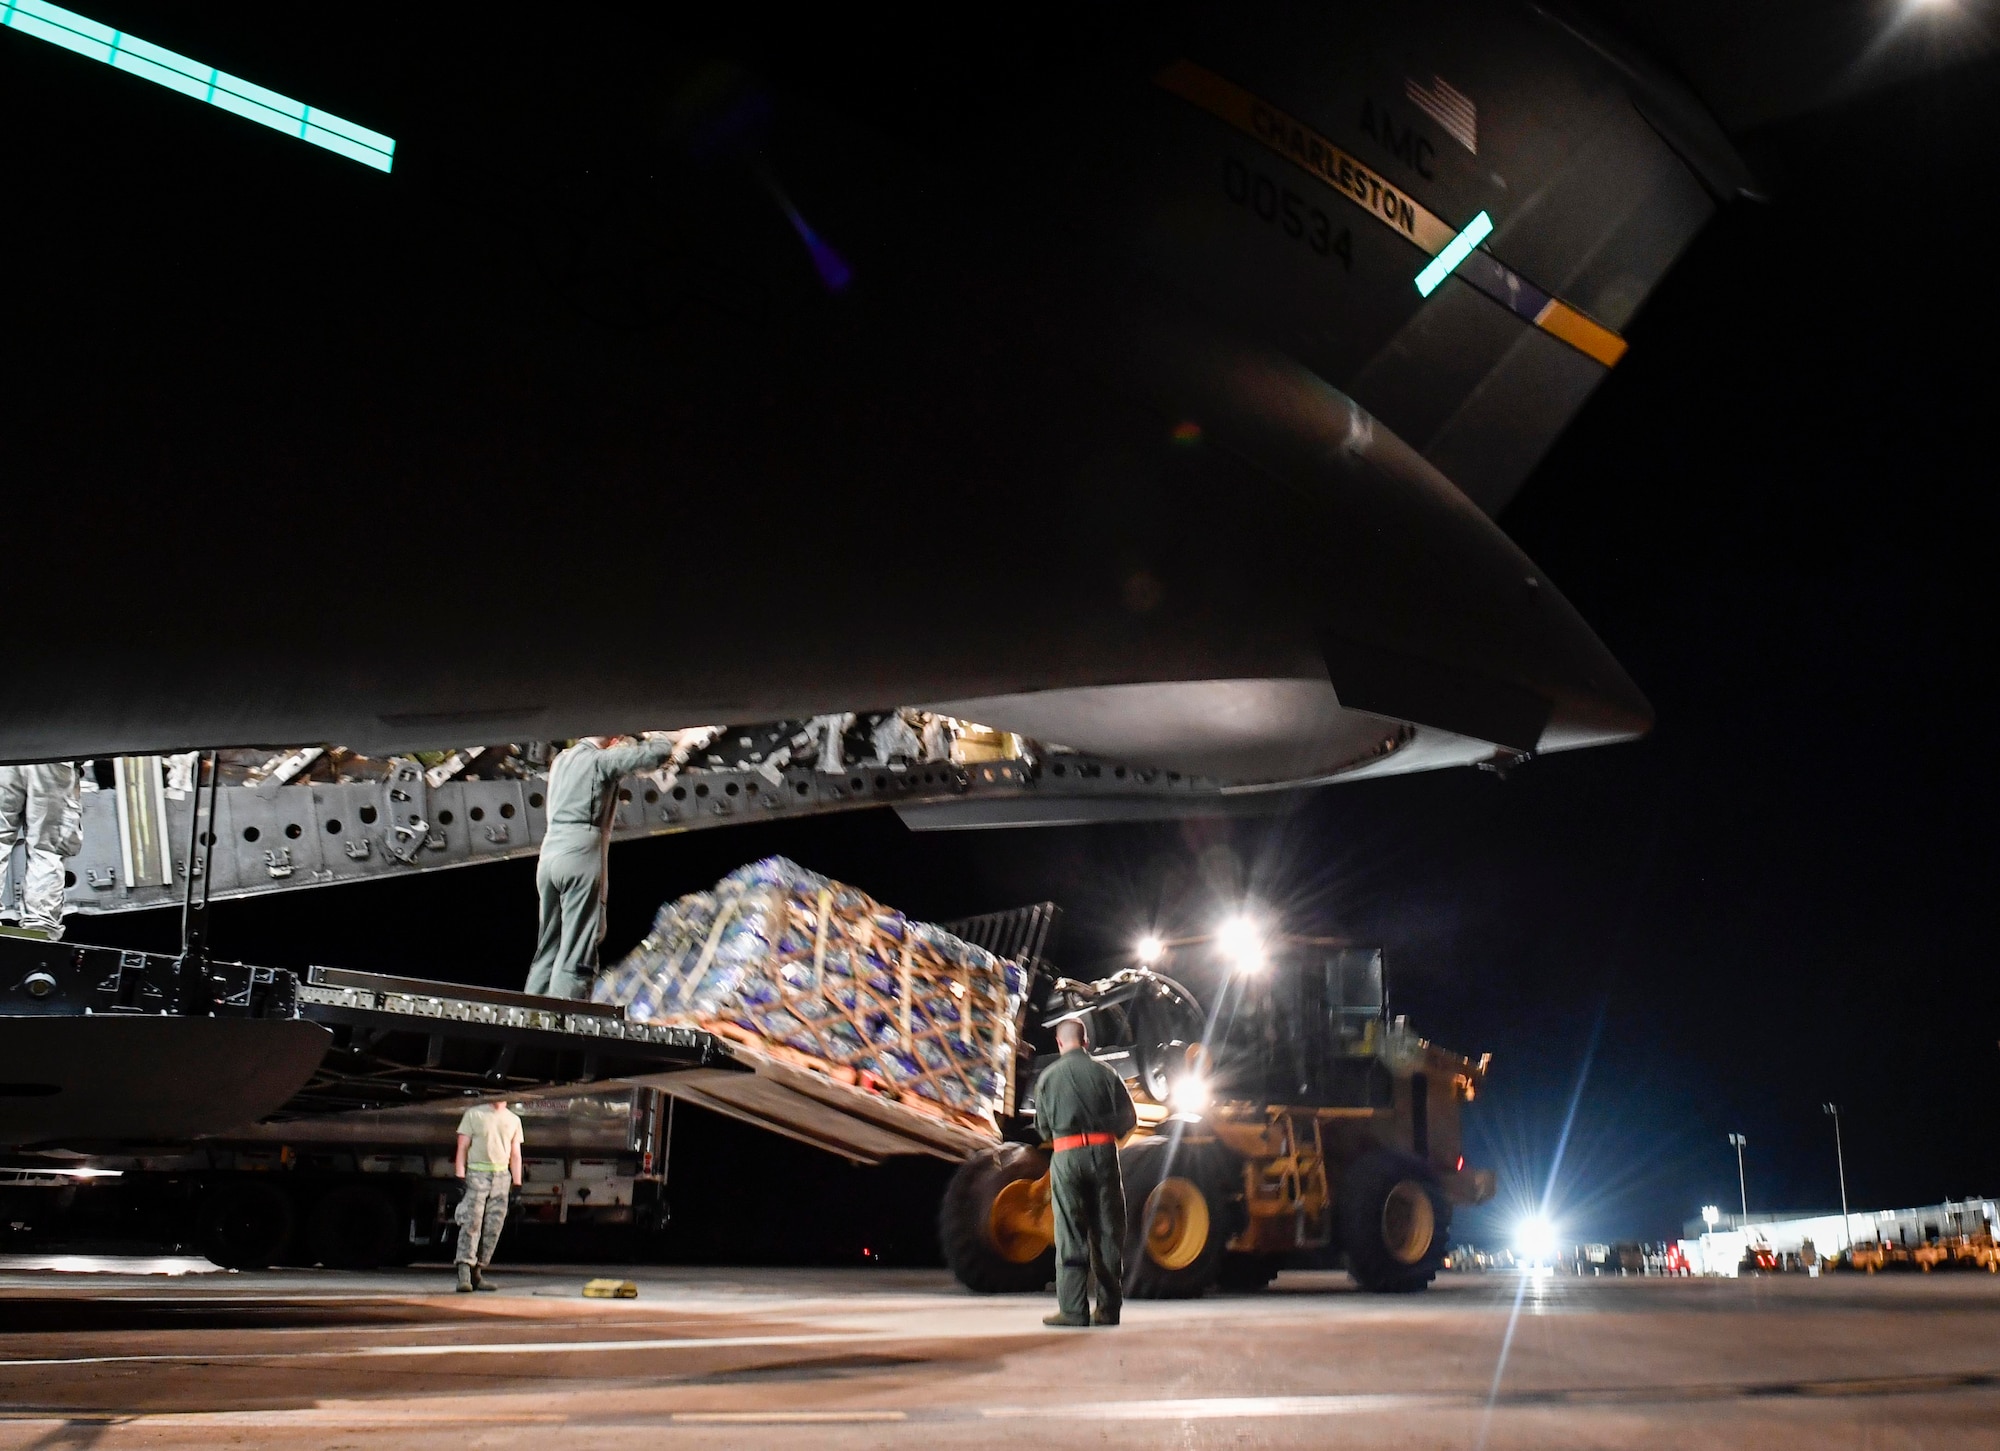 Airmen unload a pallet of water from a Joint Base Charleston C-17 Globemaster III in St. Croix, Virgin Islands, Sept. 24, 2017. Members of the 14th Airlift Squadron, 437th Airlift Wing, delivered more than 129,000 pounds of food and water to St. Croix in support of relief efforts after Hurricane Maria. The mission to St. Croix marked the second mission the crew flew to the Virgin Islands for humanitarian aid in 48 hours.